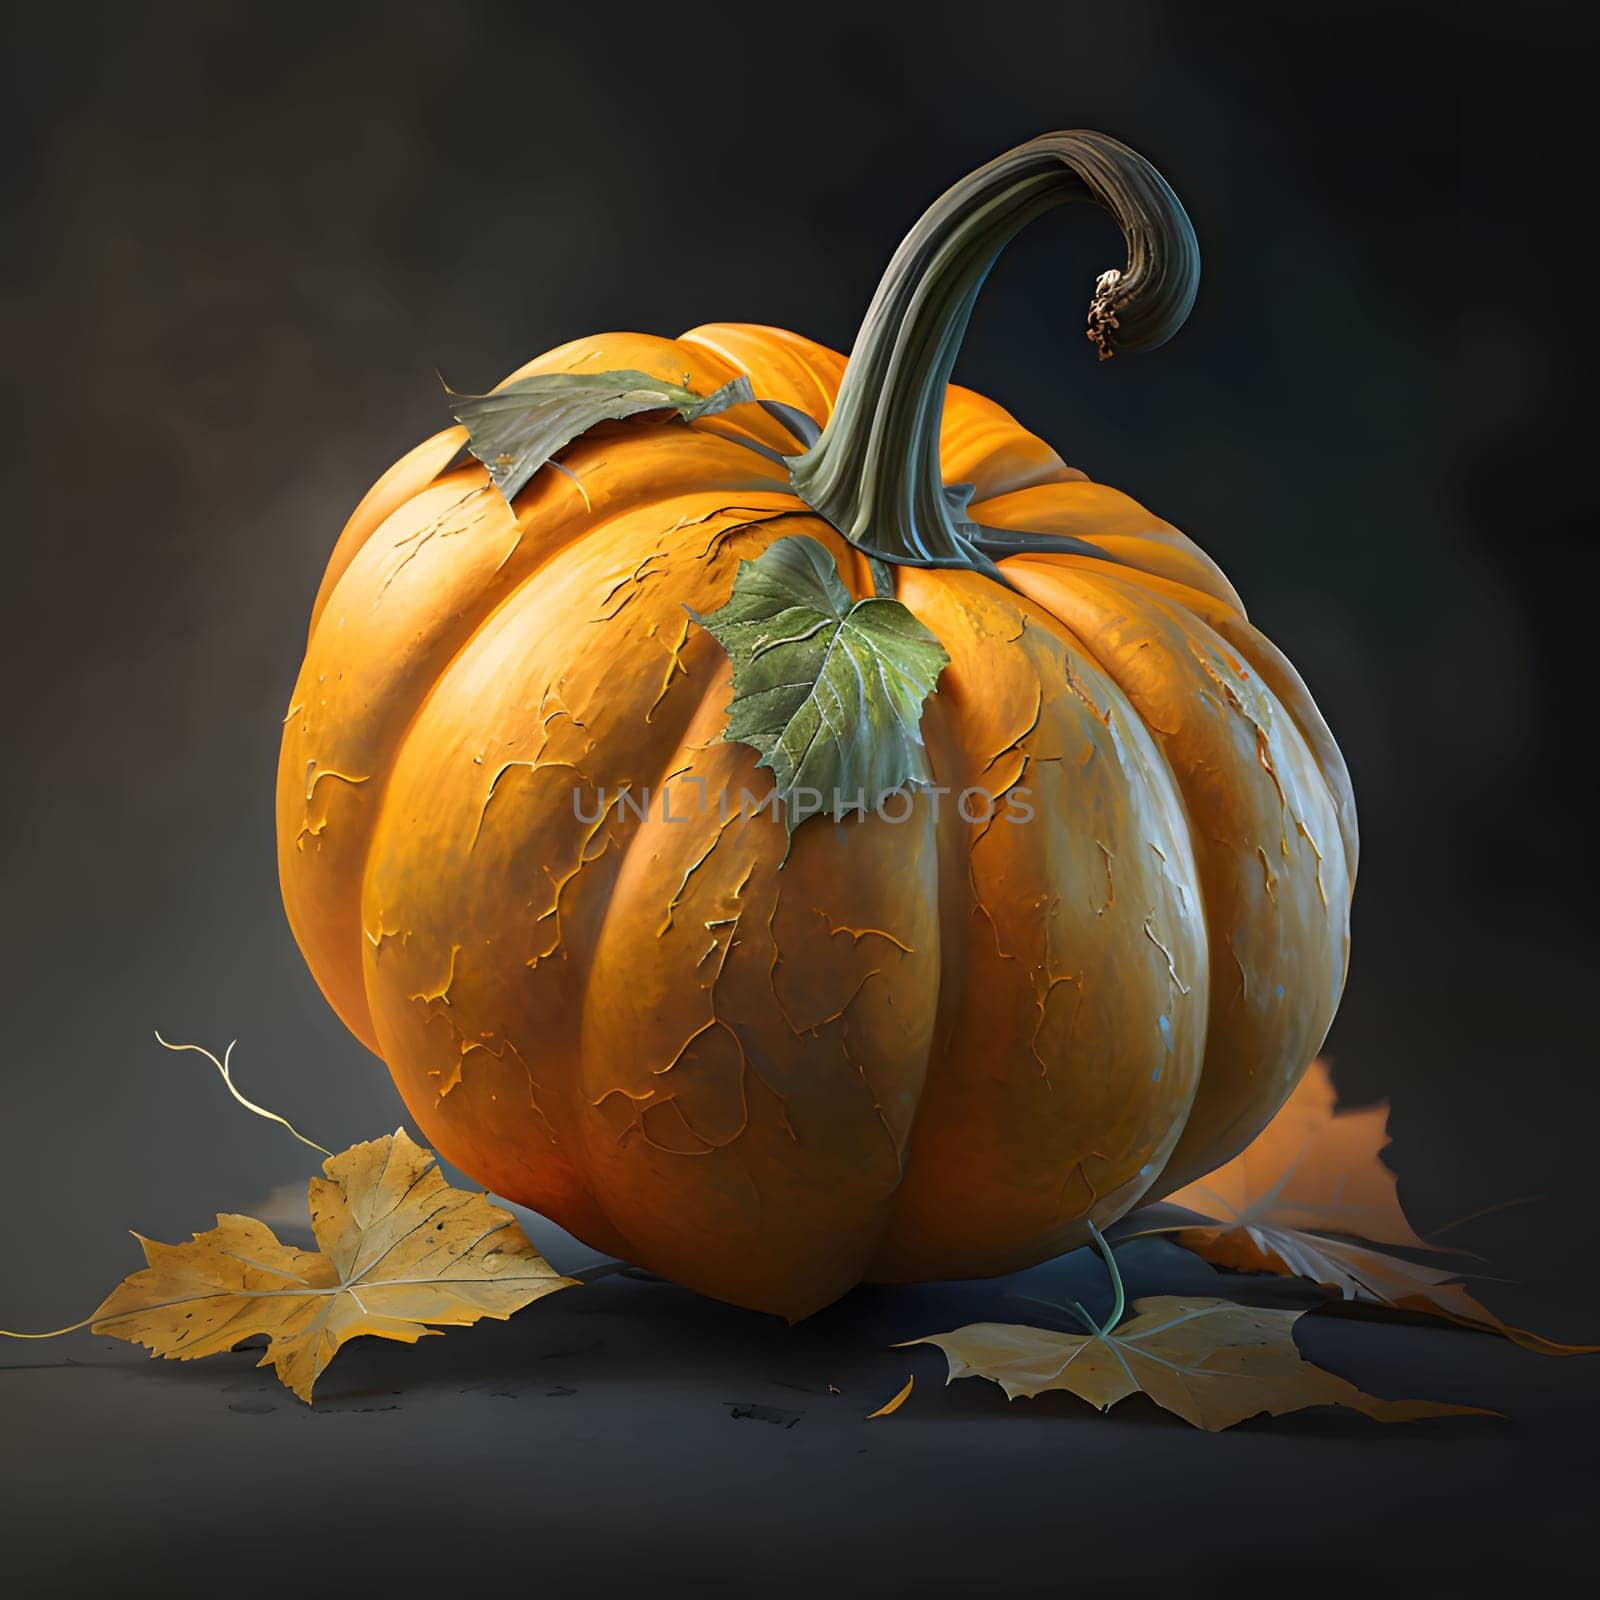 Pumpkin with leaves on a dark background. Pumpkin as a dish of thanksgiving for the harvest. An atmosphere of joy and celebration.